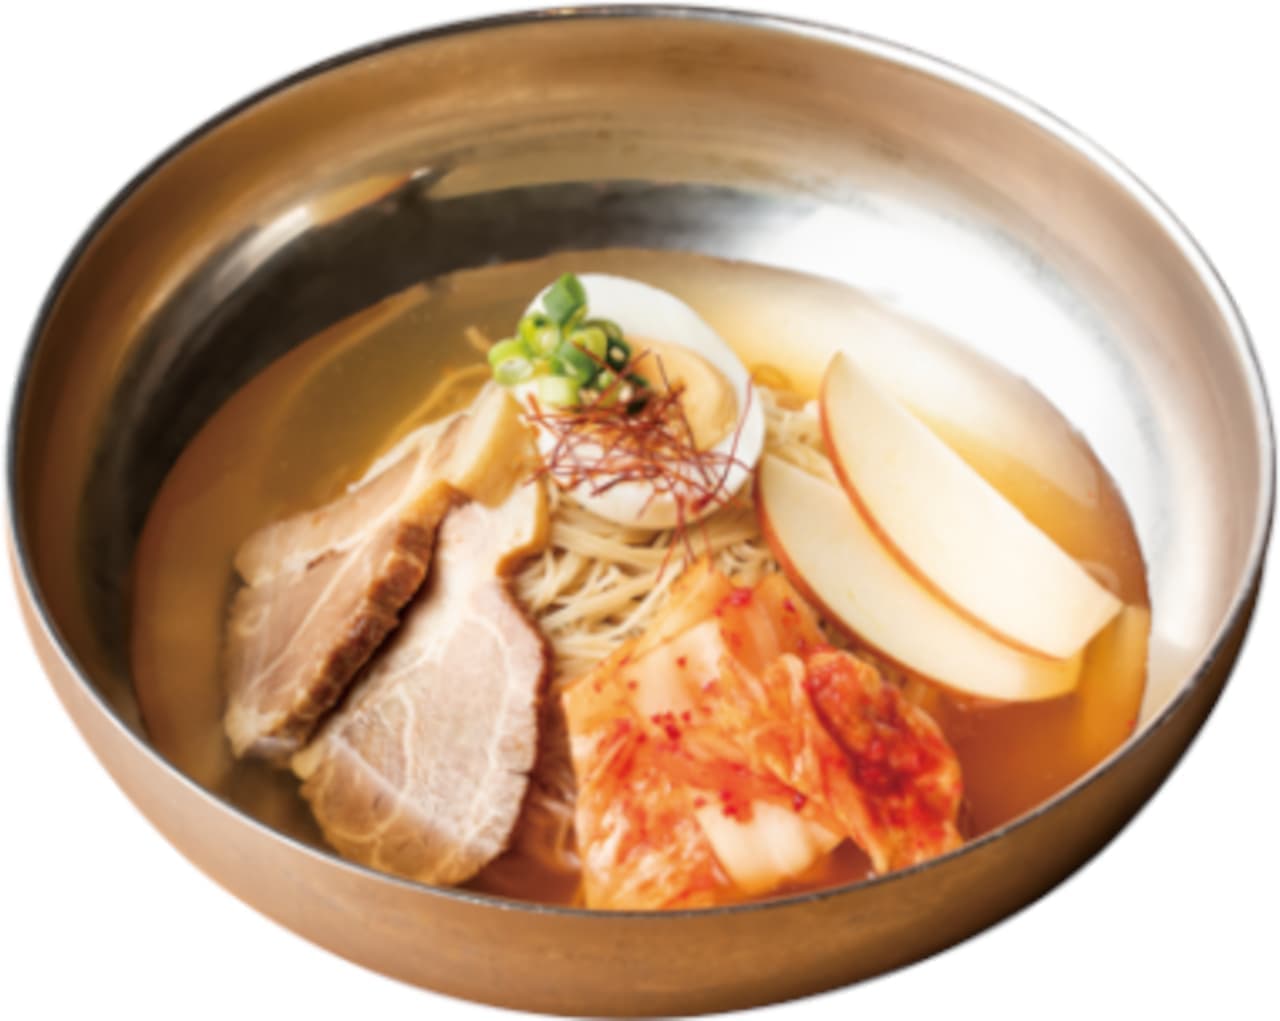 Anraku-tei "Negi Chashu Cold Noodle" and "Sesame Cold Noodle with Many Ingredients".